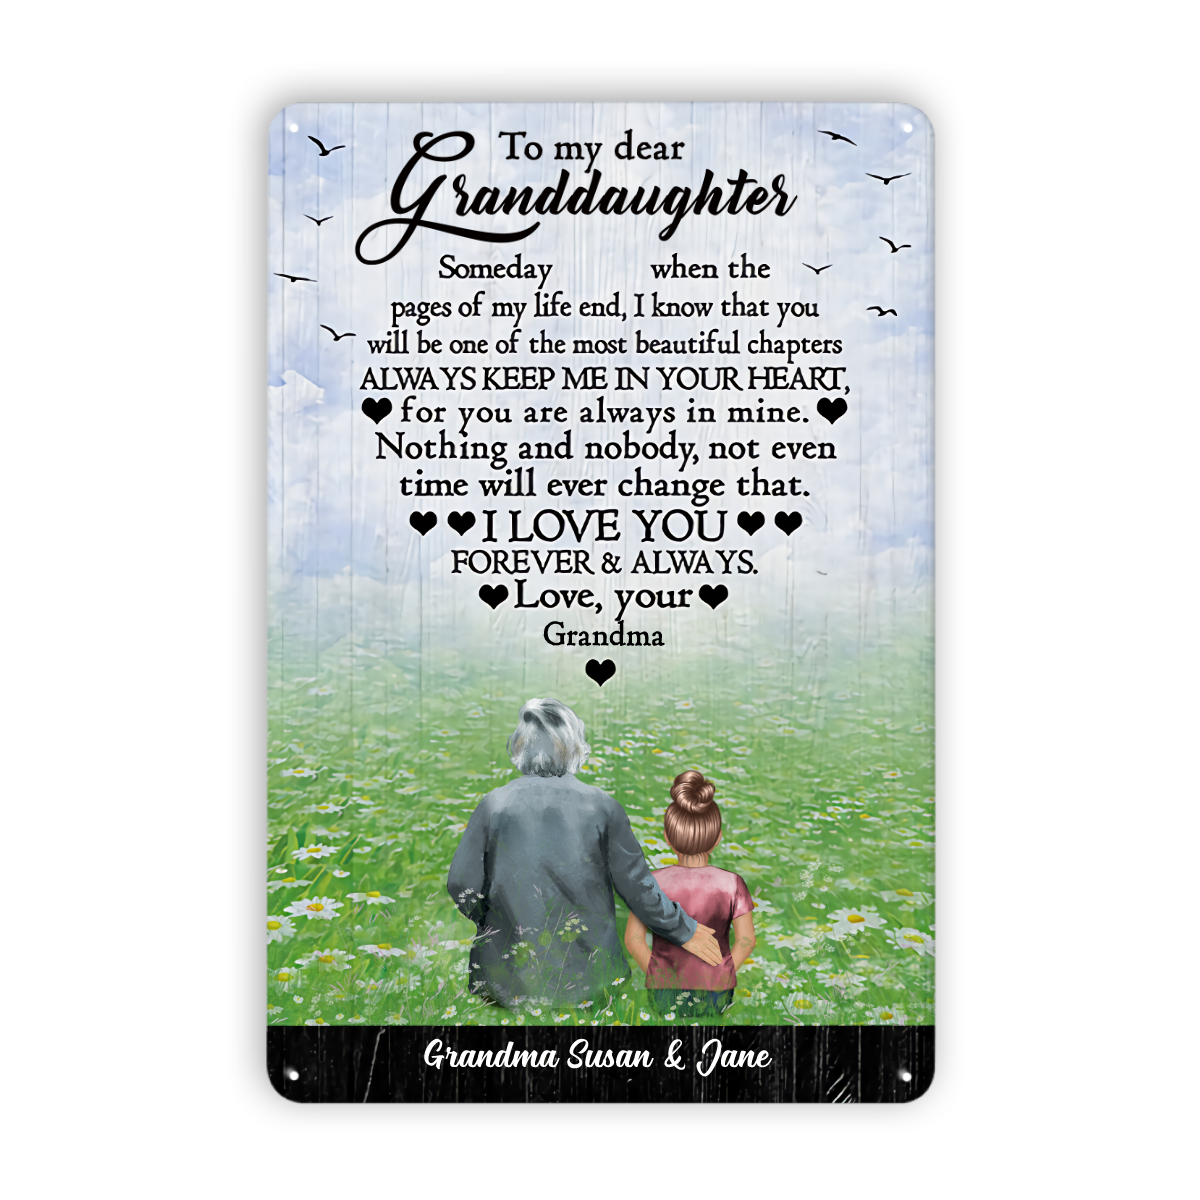 The Most Beautiful Chapters Grandparents - Gift For Grandchildren - Personalized Metal Sign